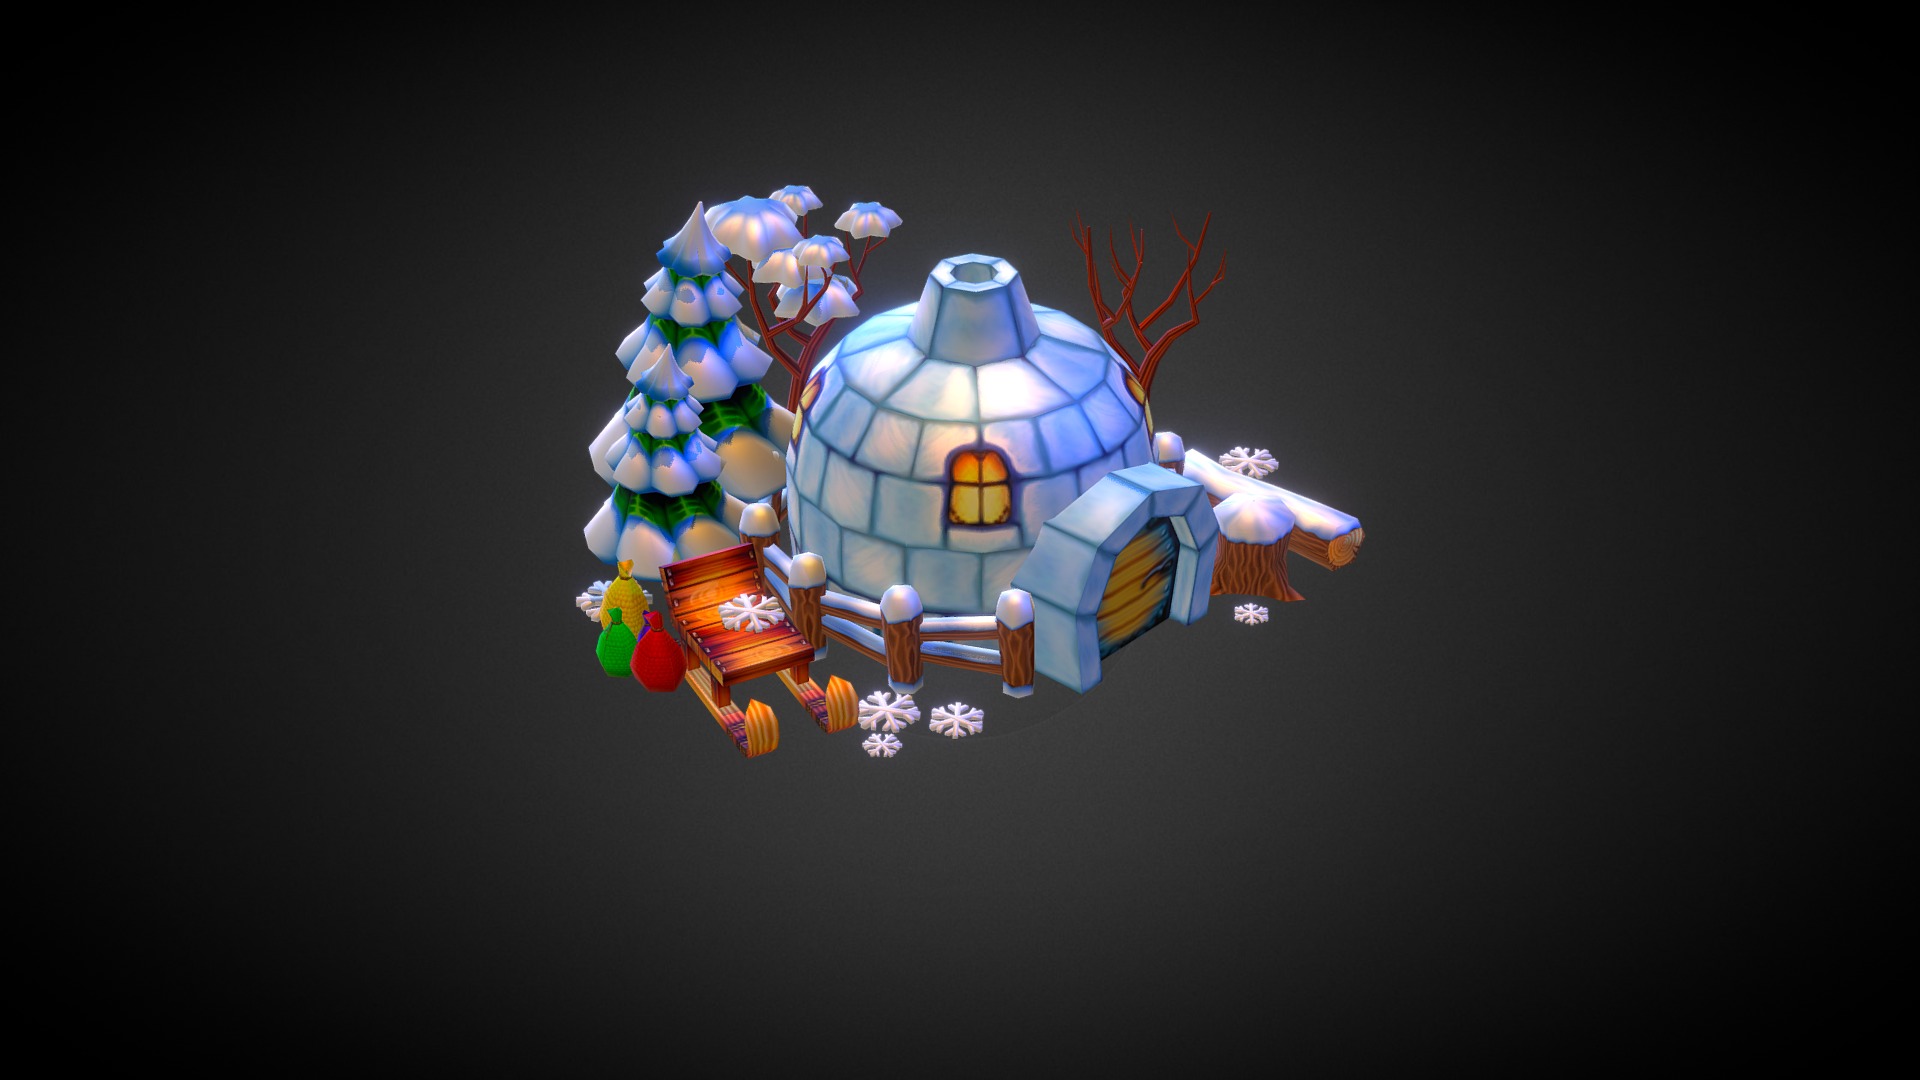 3D model Lowpoly Winter theme - This is a 3D model of the Lowpoly Winter theme. The 3D model is about a blue and orange robot.